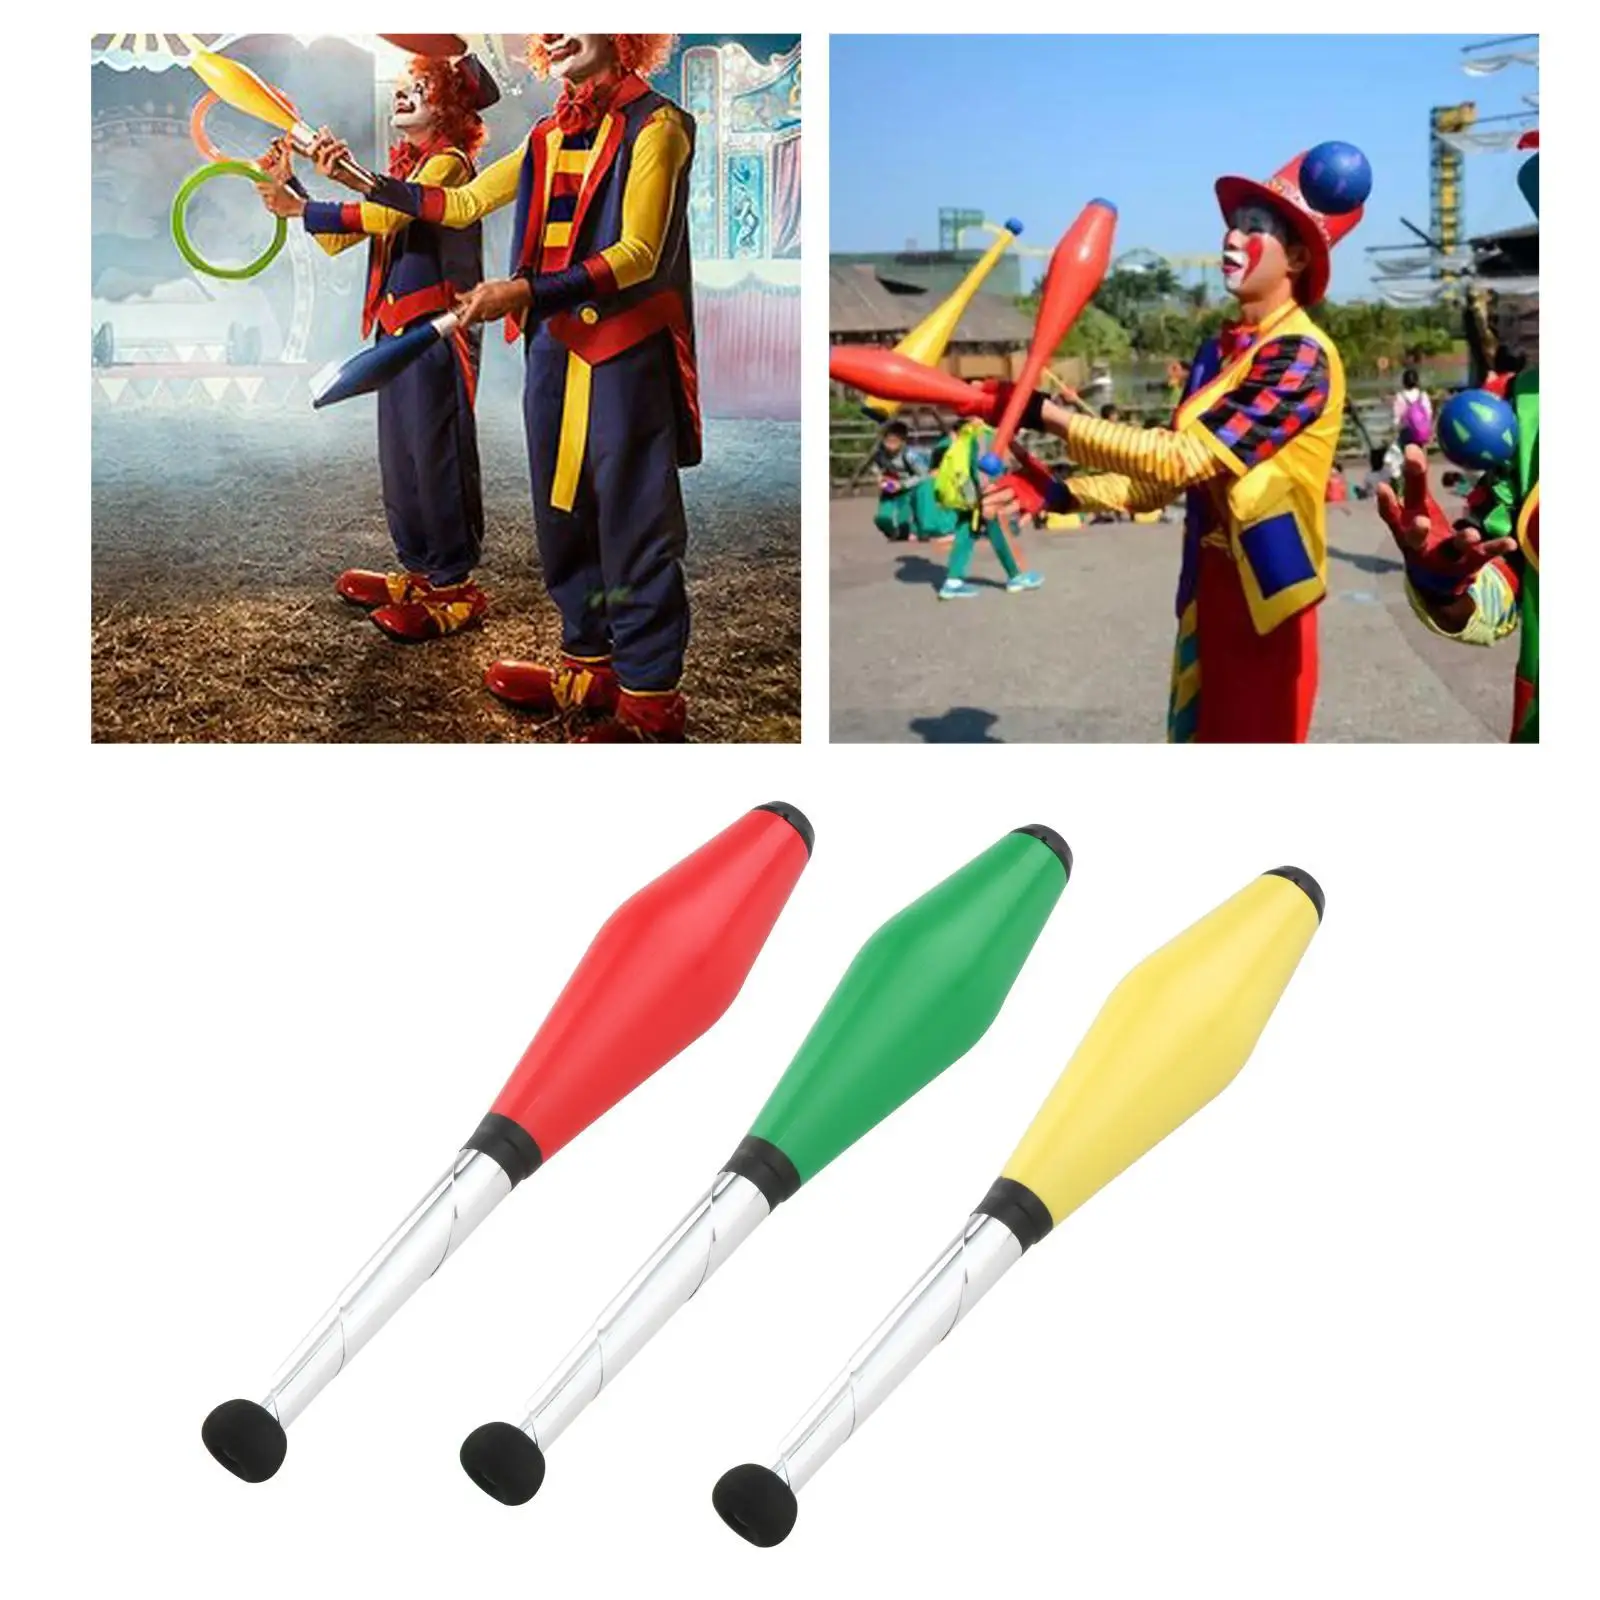 Pro Juggling Clubs Premium Sticks Pins Ultralight for Prop Kids Playing Toys